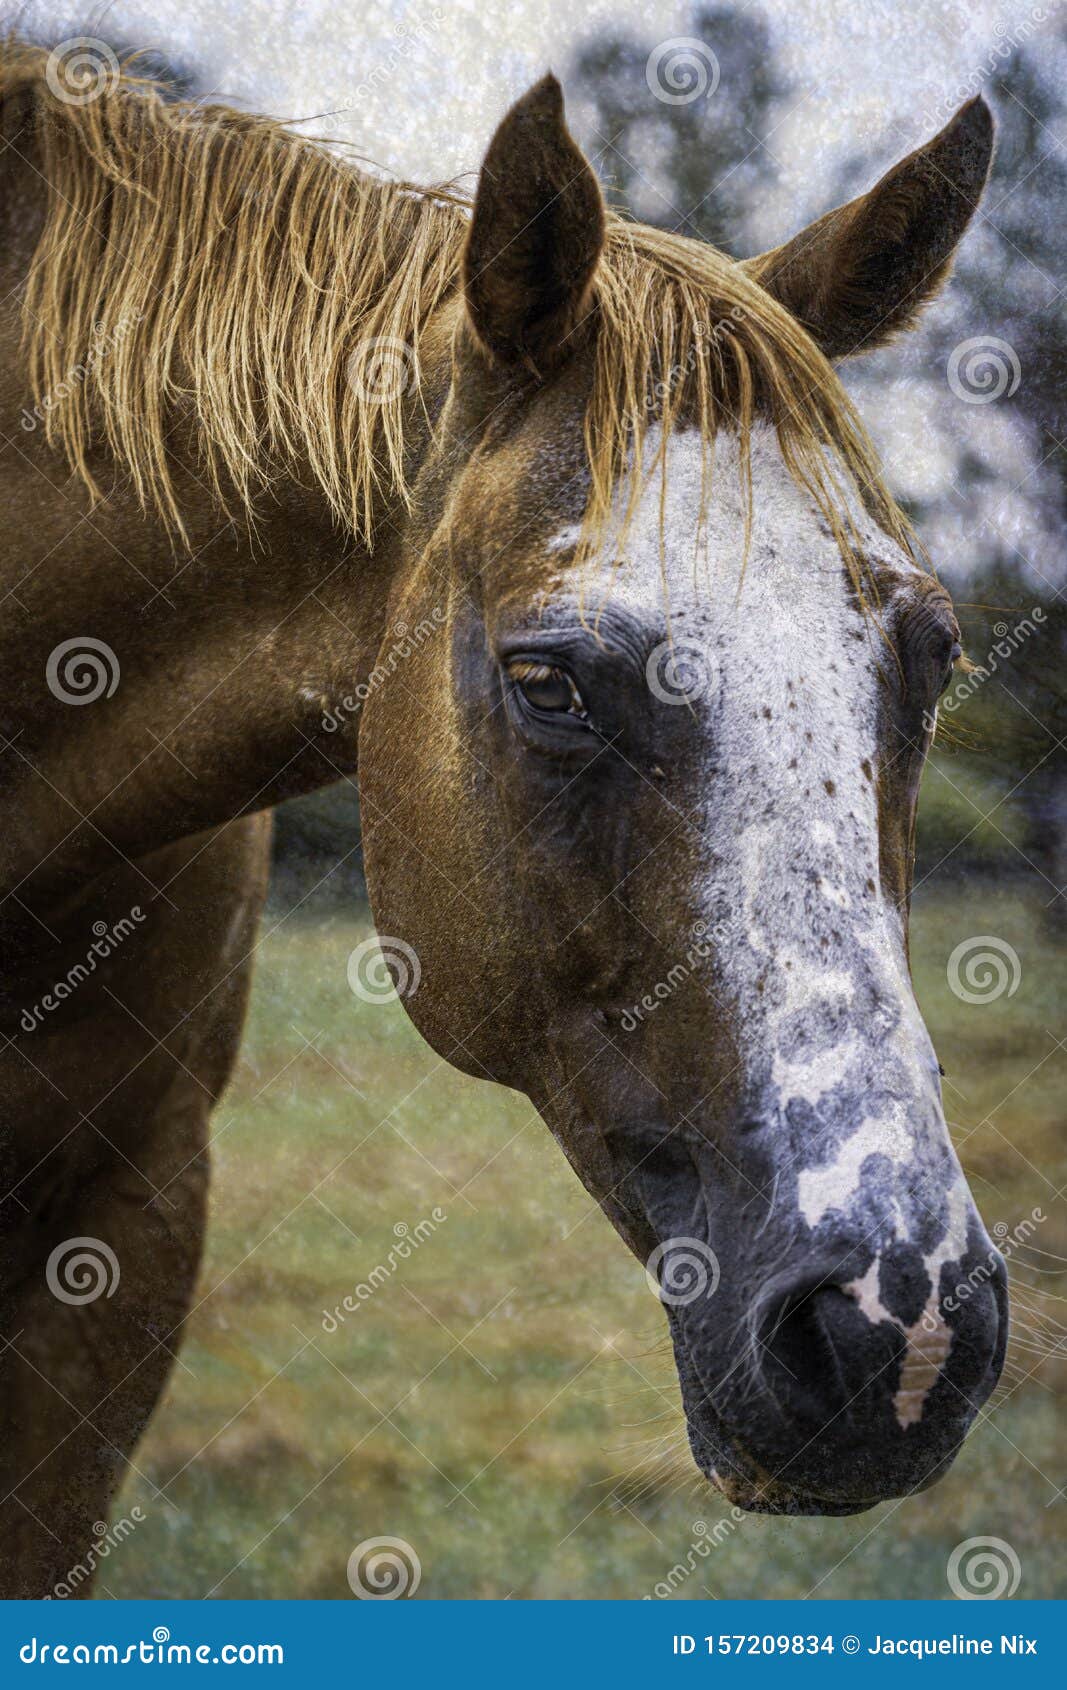 horse portrait with textured effect